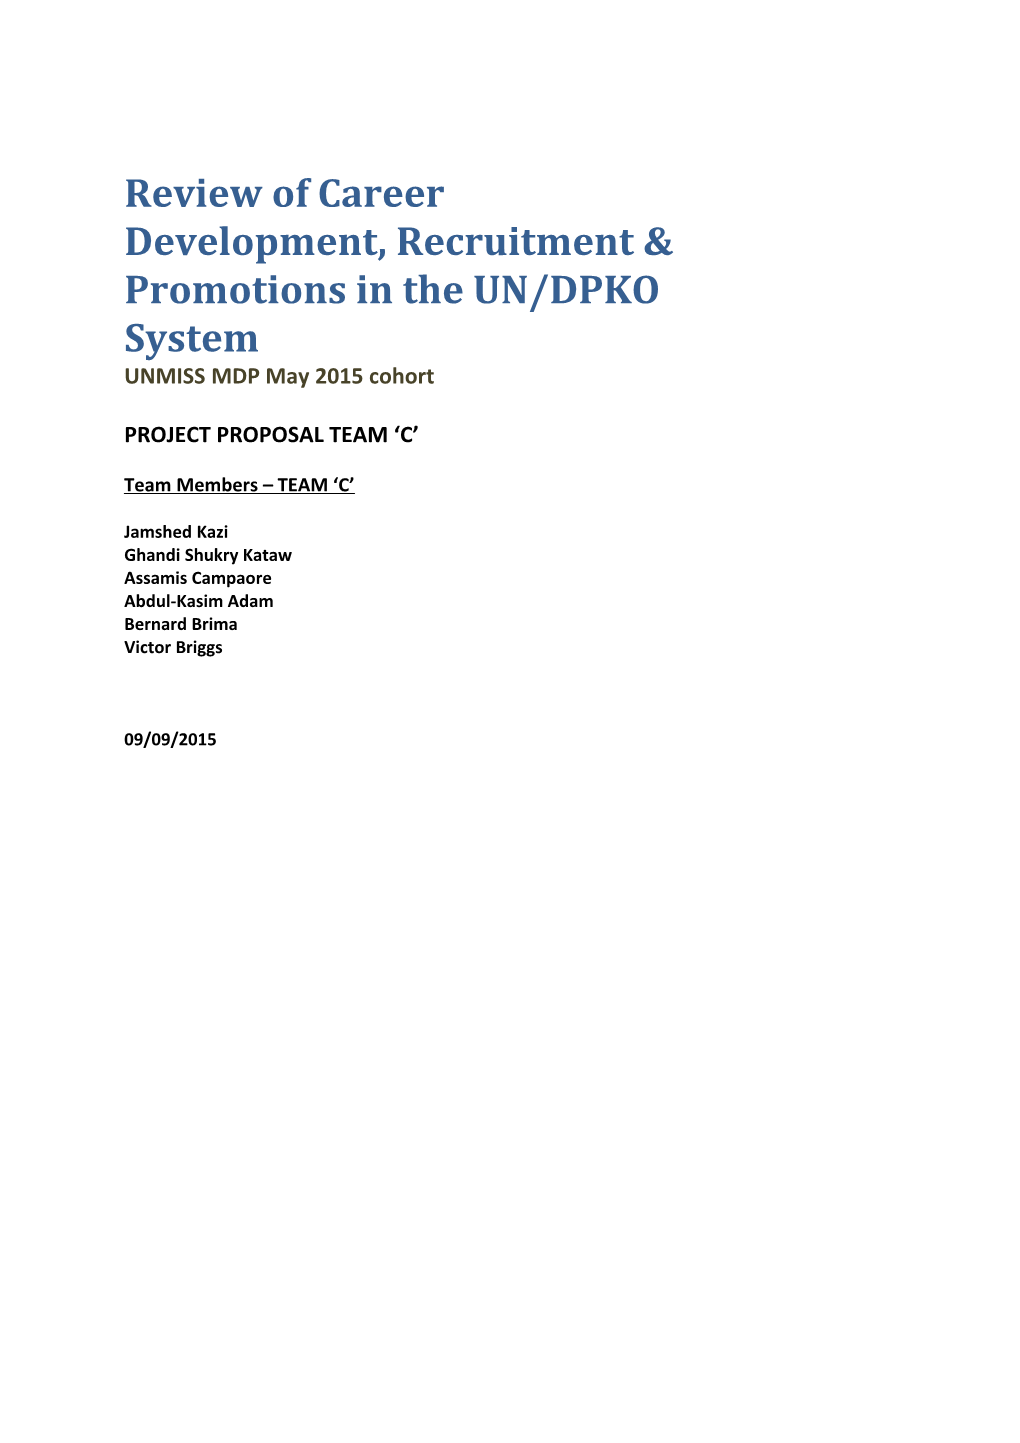 Review of Career Development, Recruitment & Promotions in the UN/DPKO System